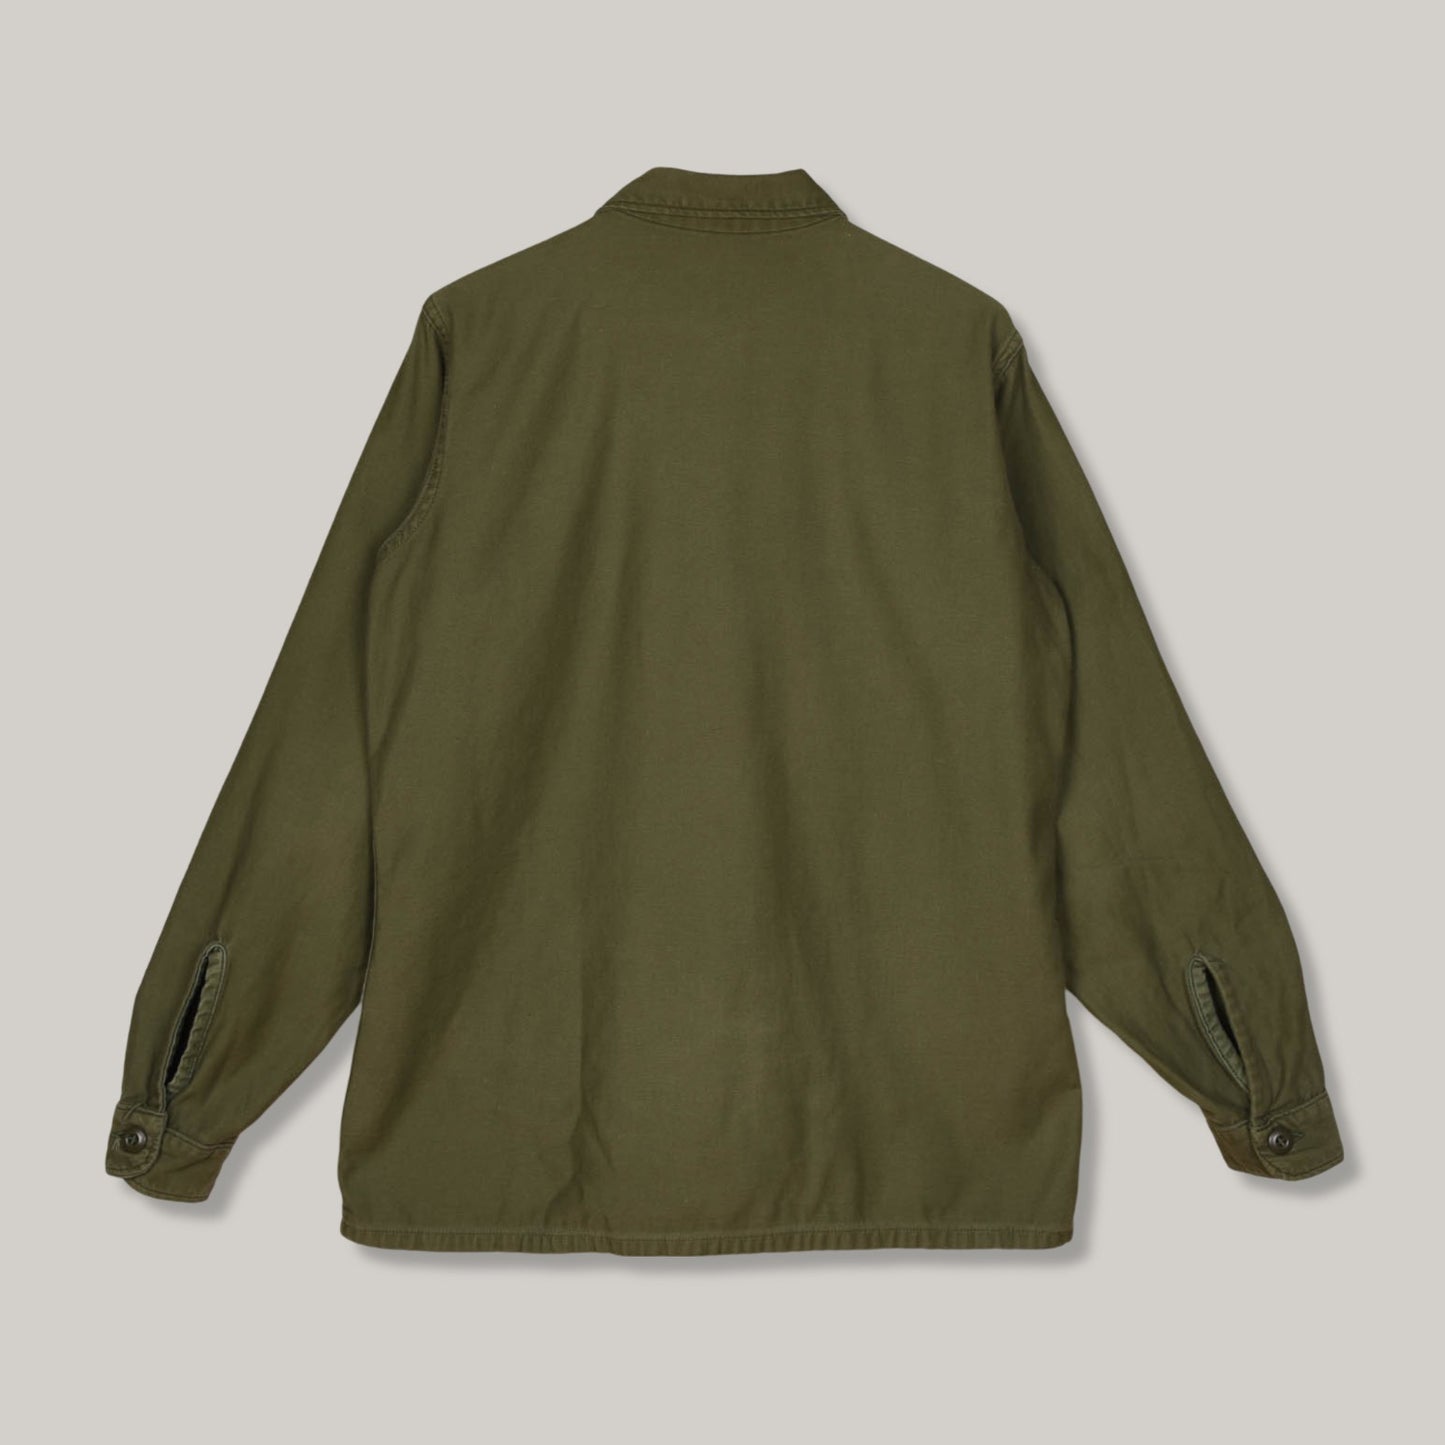 USED ARMY FATIGUE OVERSHIRT - ARMY GREEN